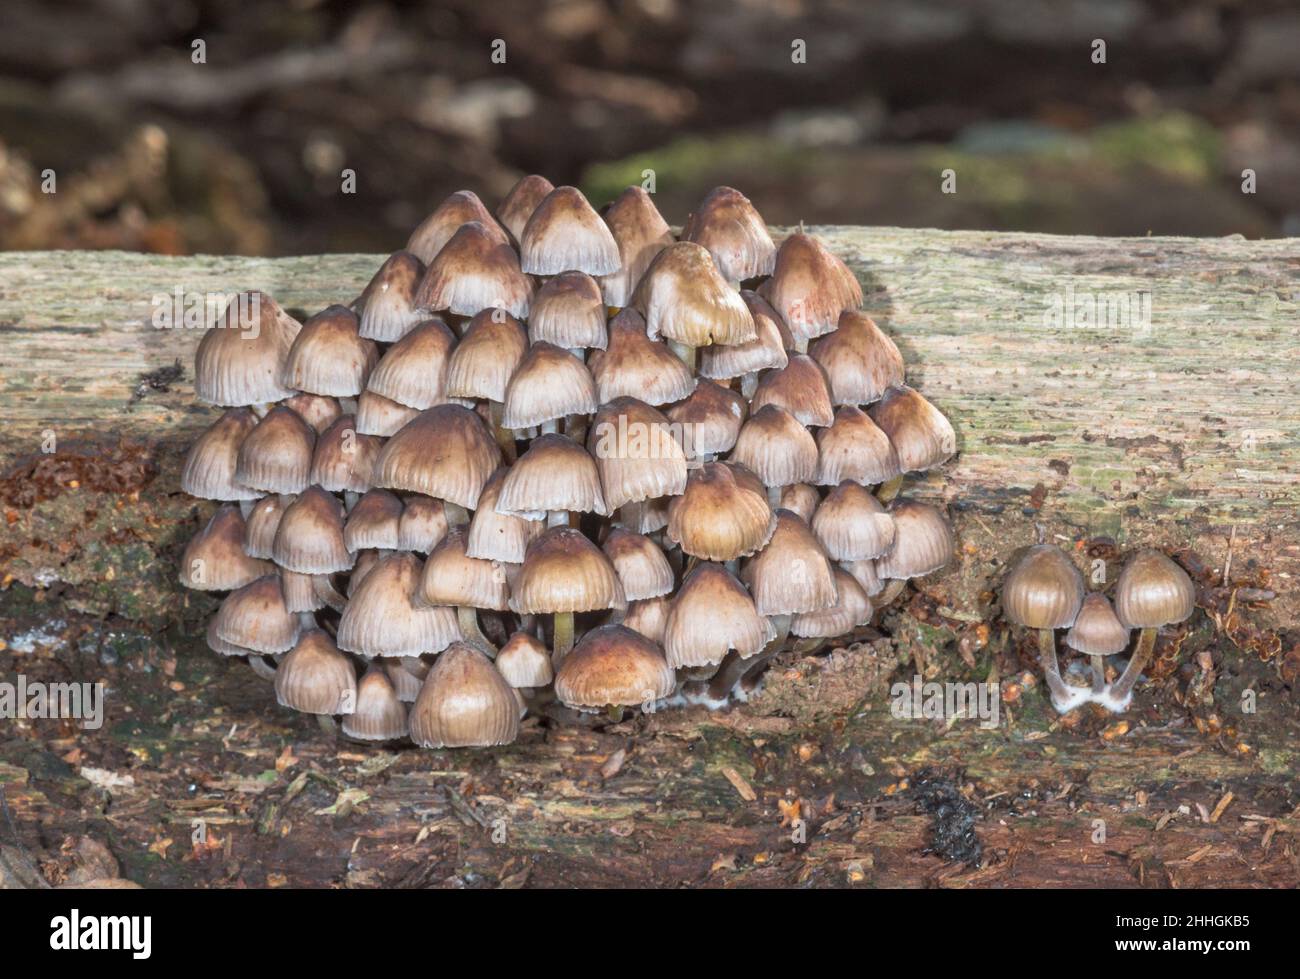 A Clump of Toadstools on wood in Autumn, Sussex, UK Stock Photo